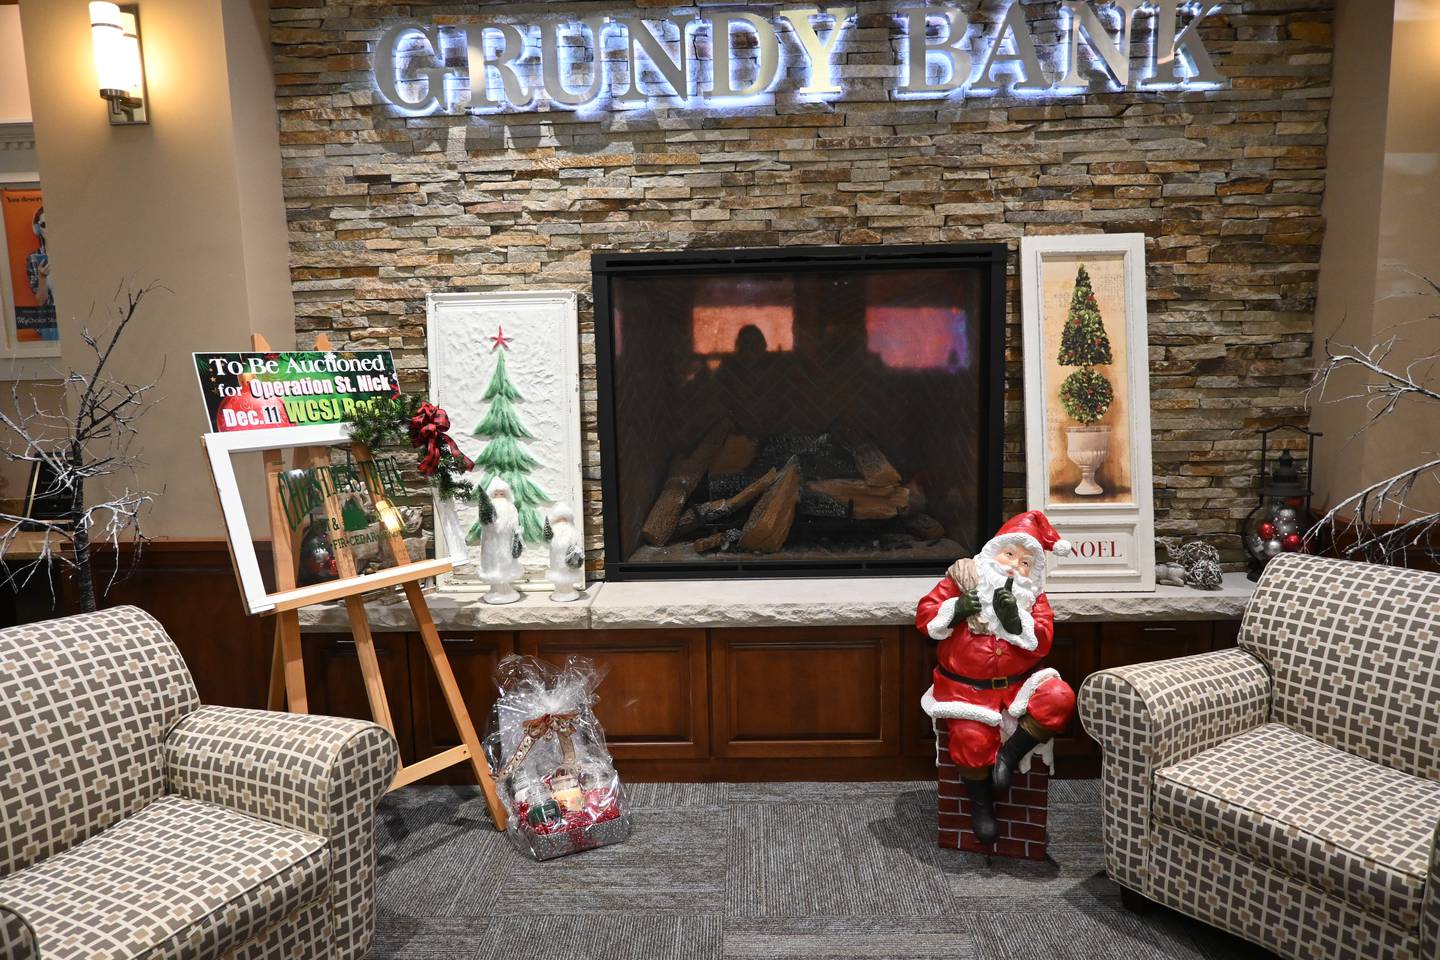 Operation St. Nick Radio Auction items on display at Grundy Bank in Morris.